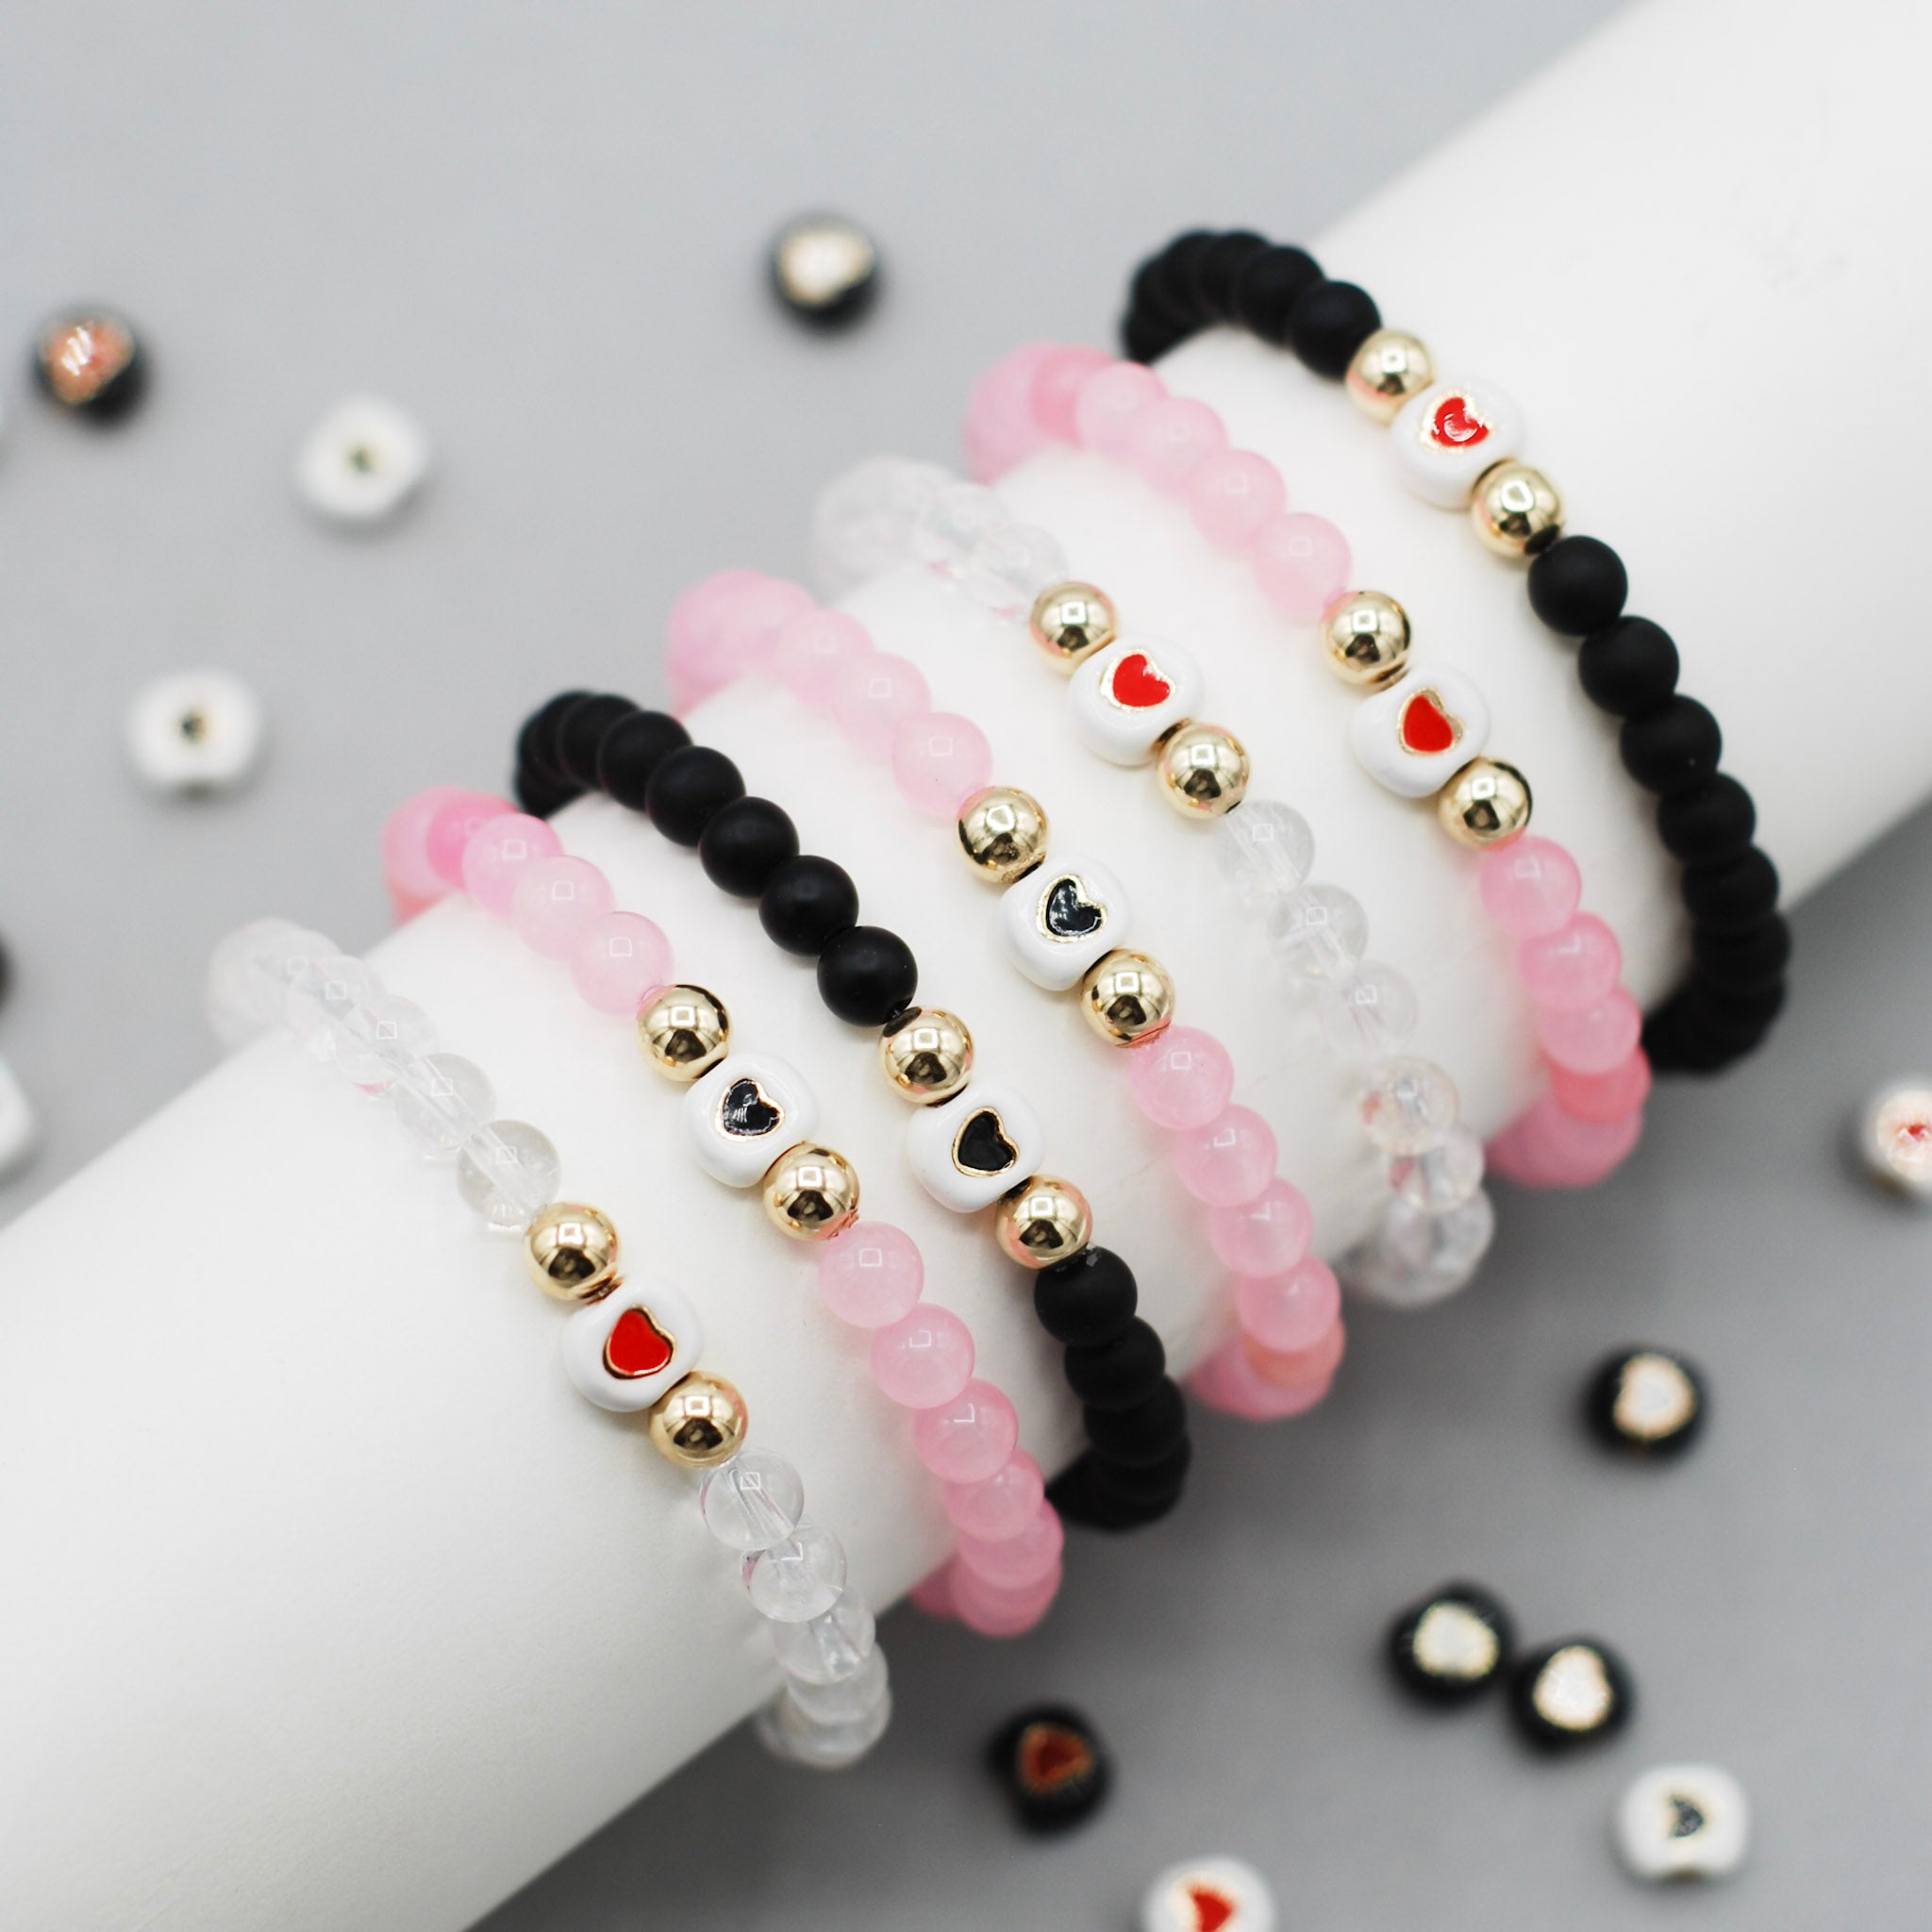 Boho Chic Red And Black Rope Pearl Bracelet With Irregular Big Baroque  Pearl Charm Bracelet For Women And Girls L230704 From Lianwu09, $9.47 |  DHgate.Com